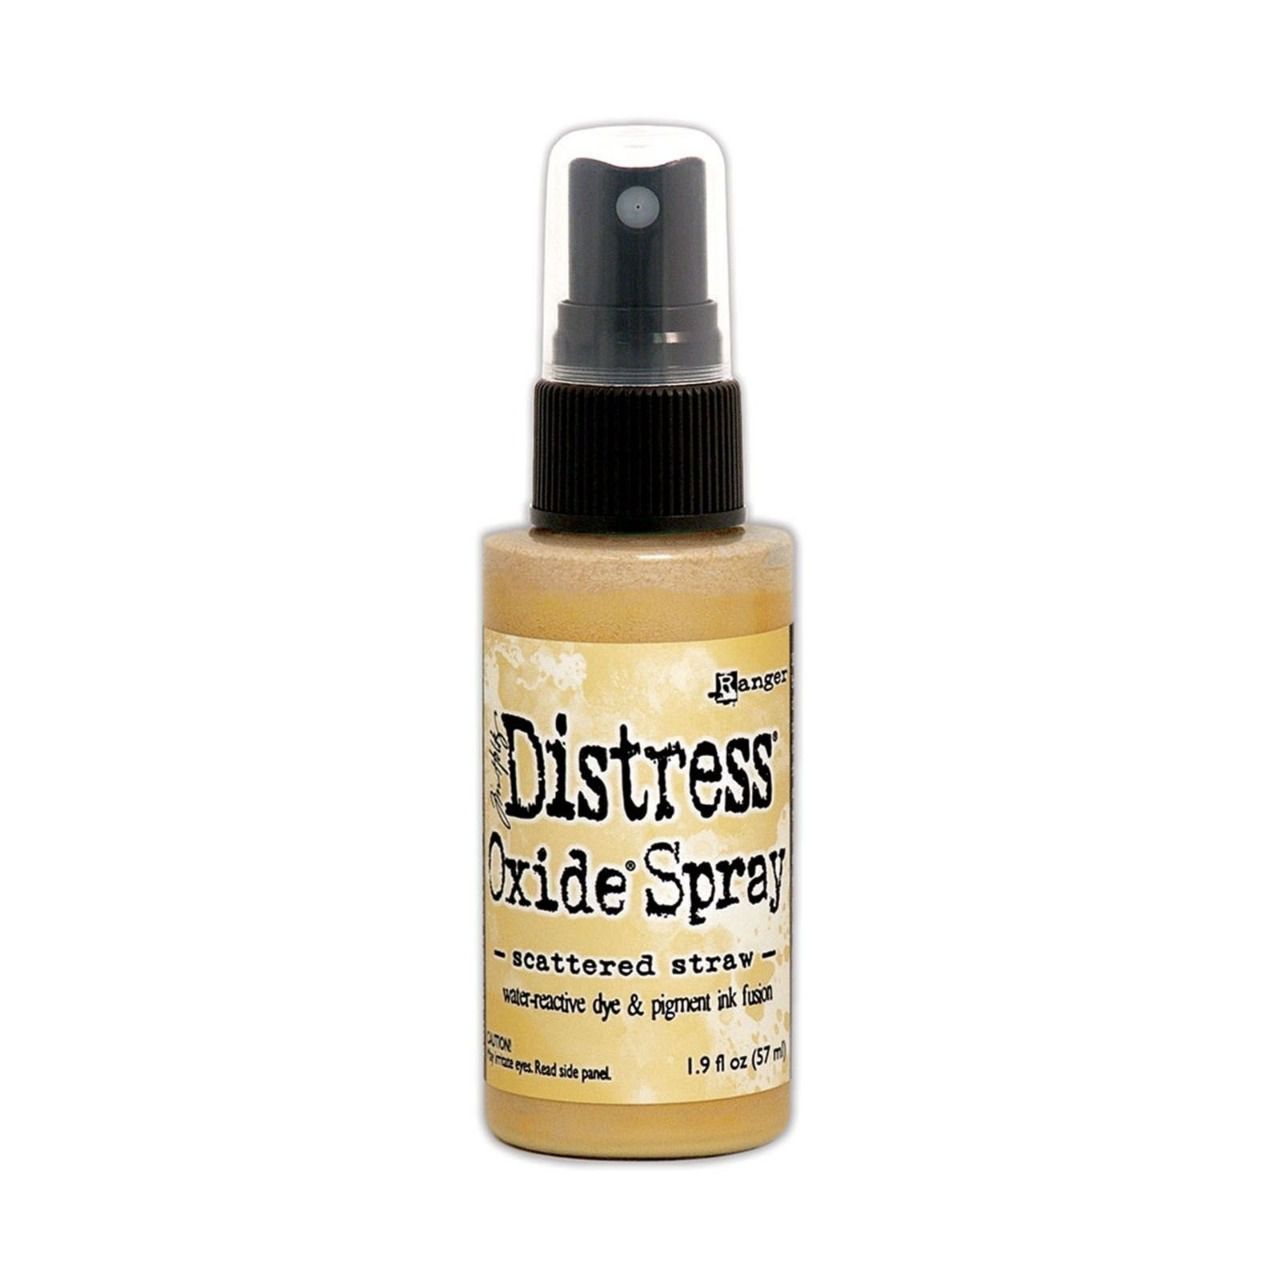 Distress spray oxide : scattered straw